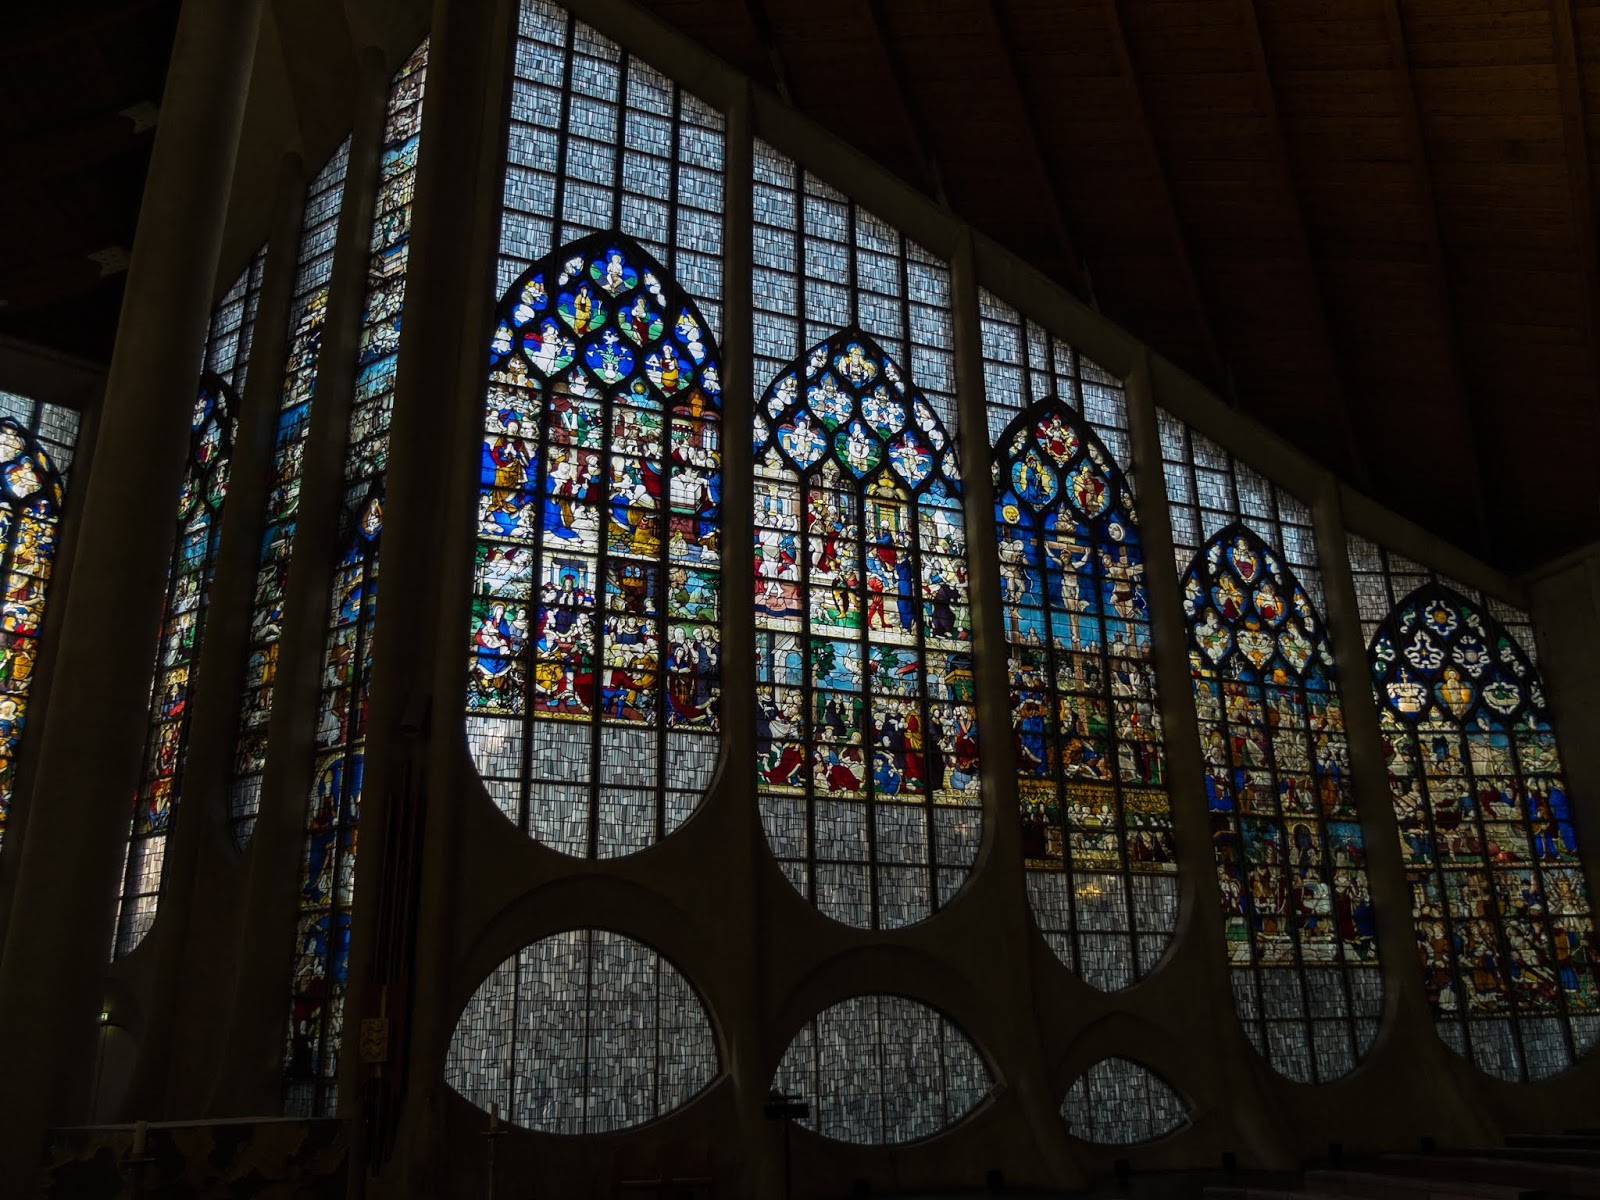 Stained glass window panes in the Church of Joan of Arc in Rouen, France.